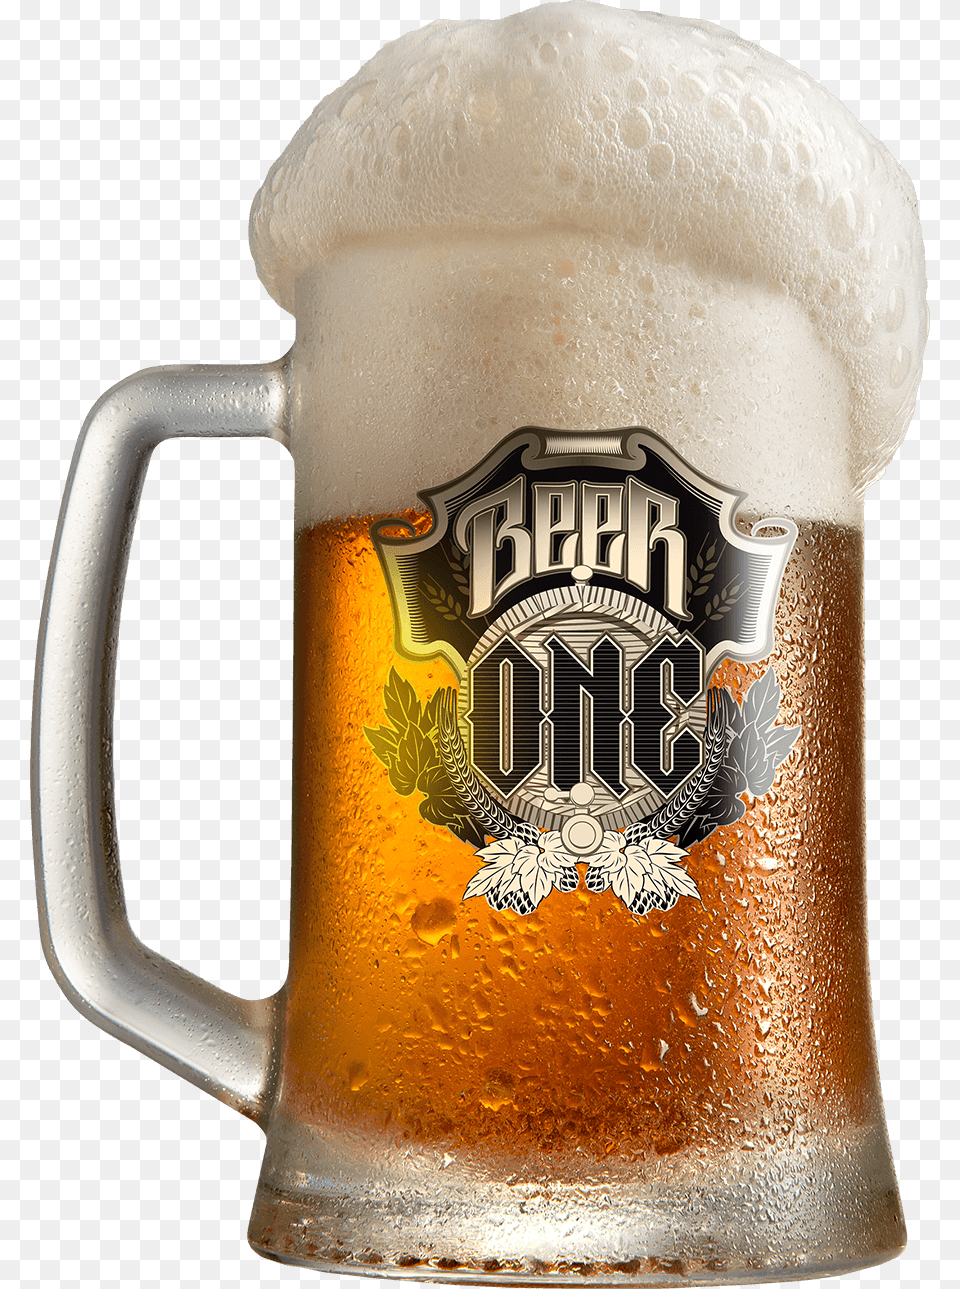 Lager Beer Wheat Stein Glasses Free Transparent Beer One, Alcohol, Beverage, Cup, Glass Png Image